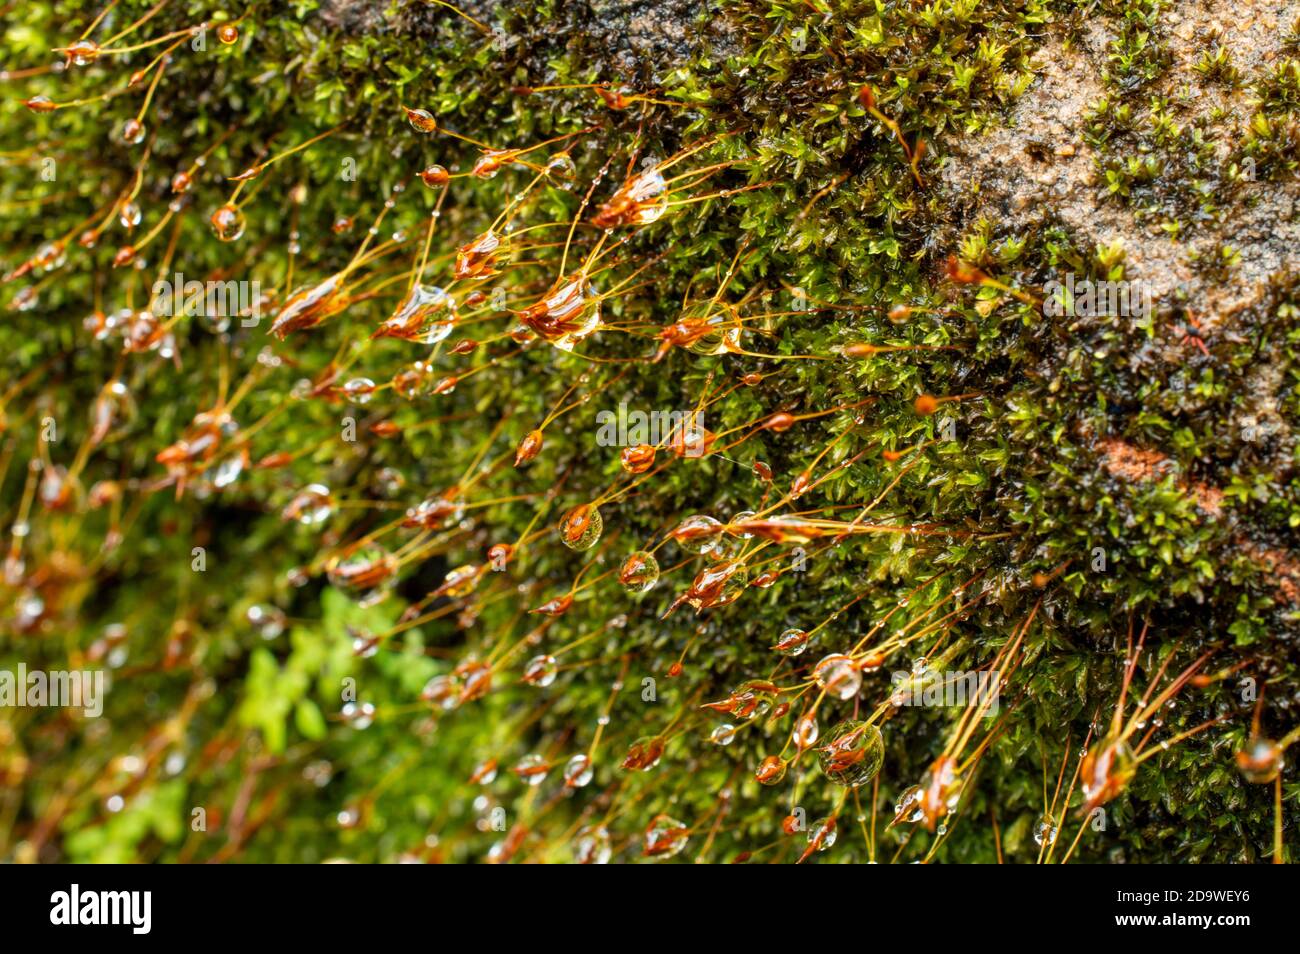 Mosses, or the taxonomic division Bryophyta, are small, non-vascular flowerless plants that typically form dense green clumps or mats Stock Photo